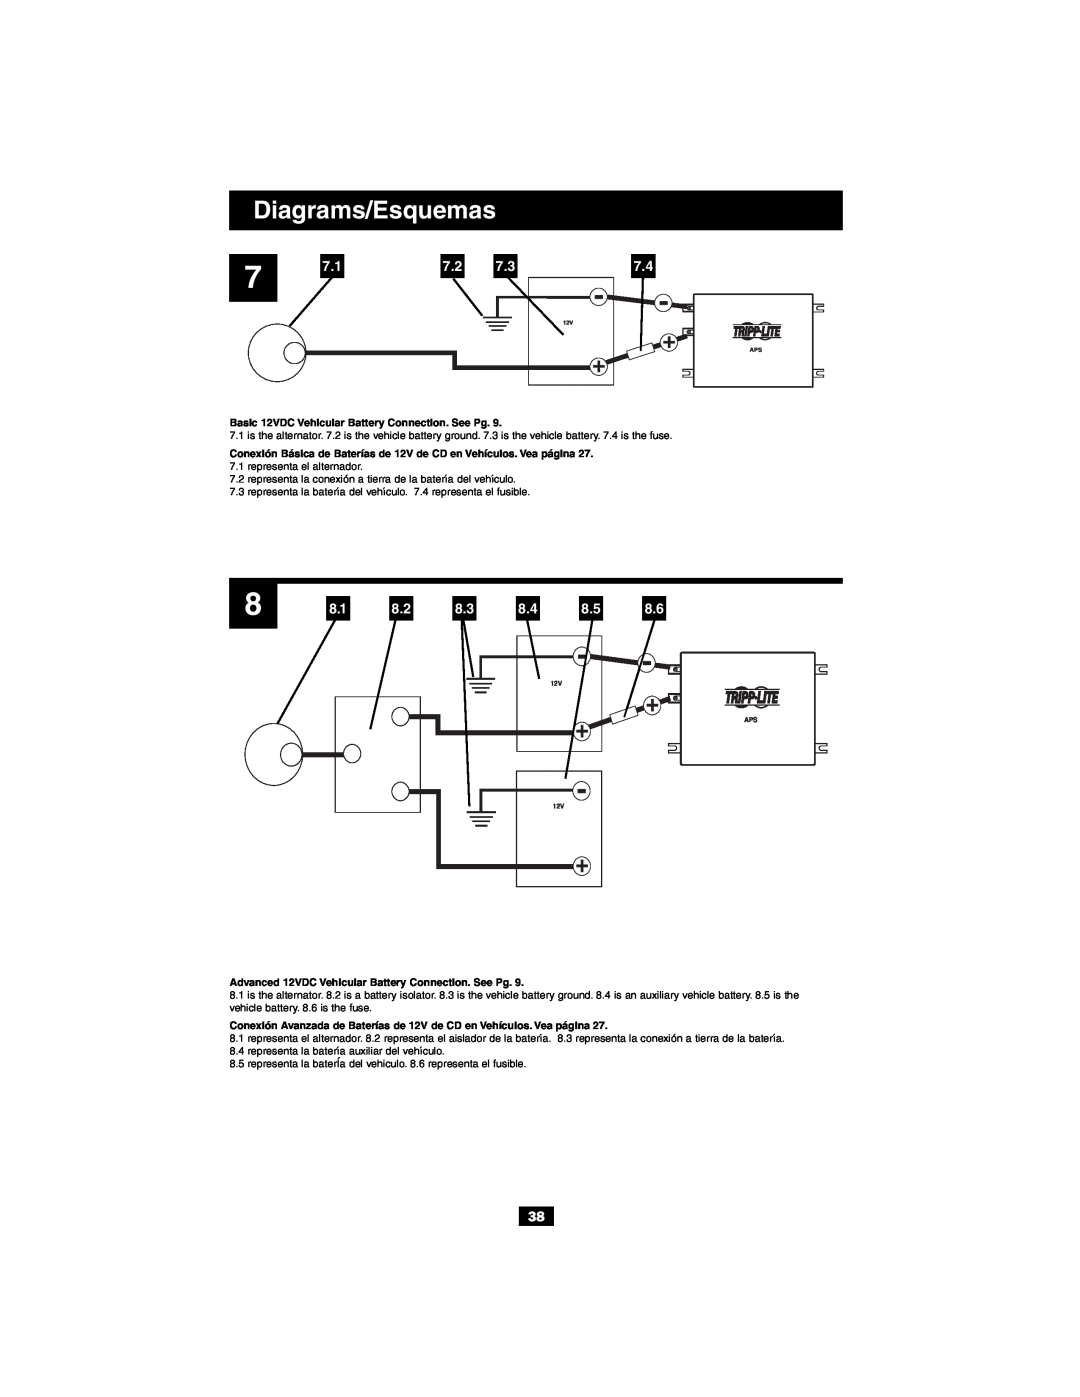 Tripp Lite Alternative Power Source owner manual Diagrams/Esquemas, Basic 12VDC Vehicular Battery Connection. See Pg 